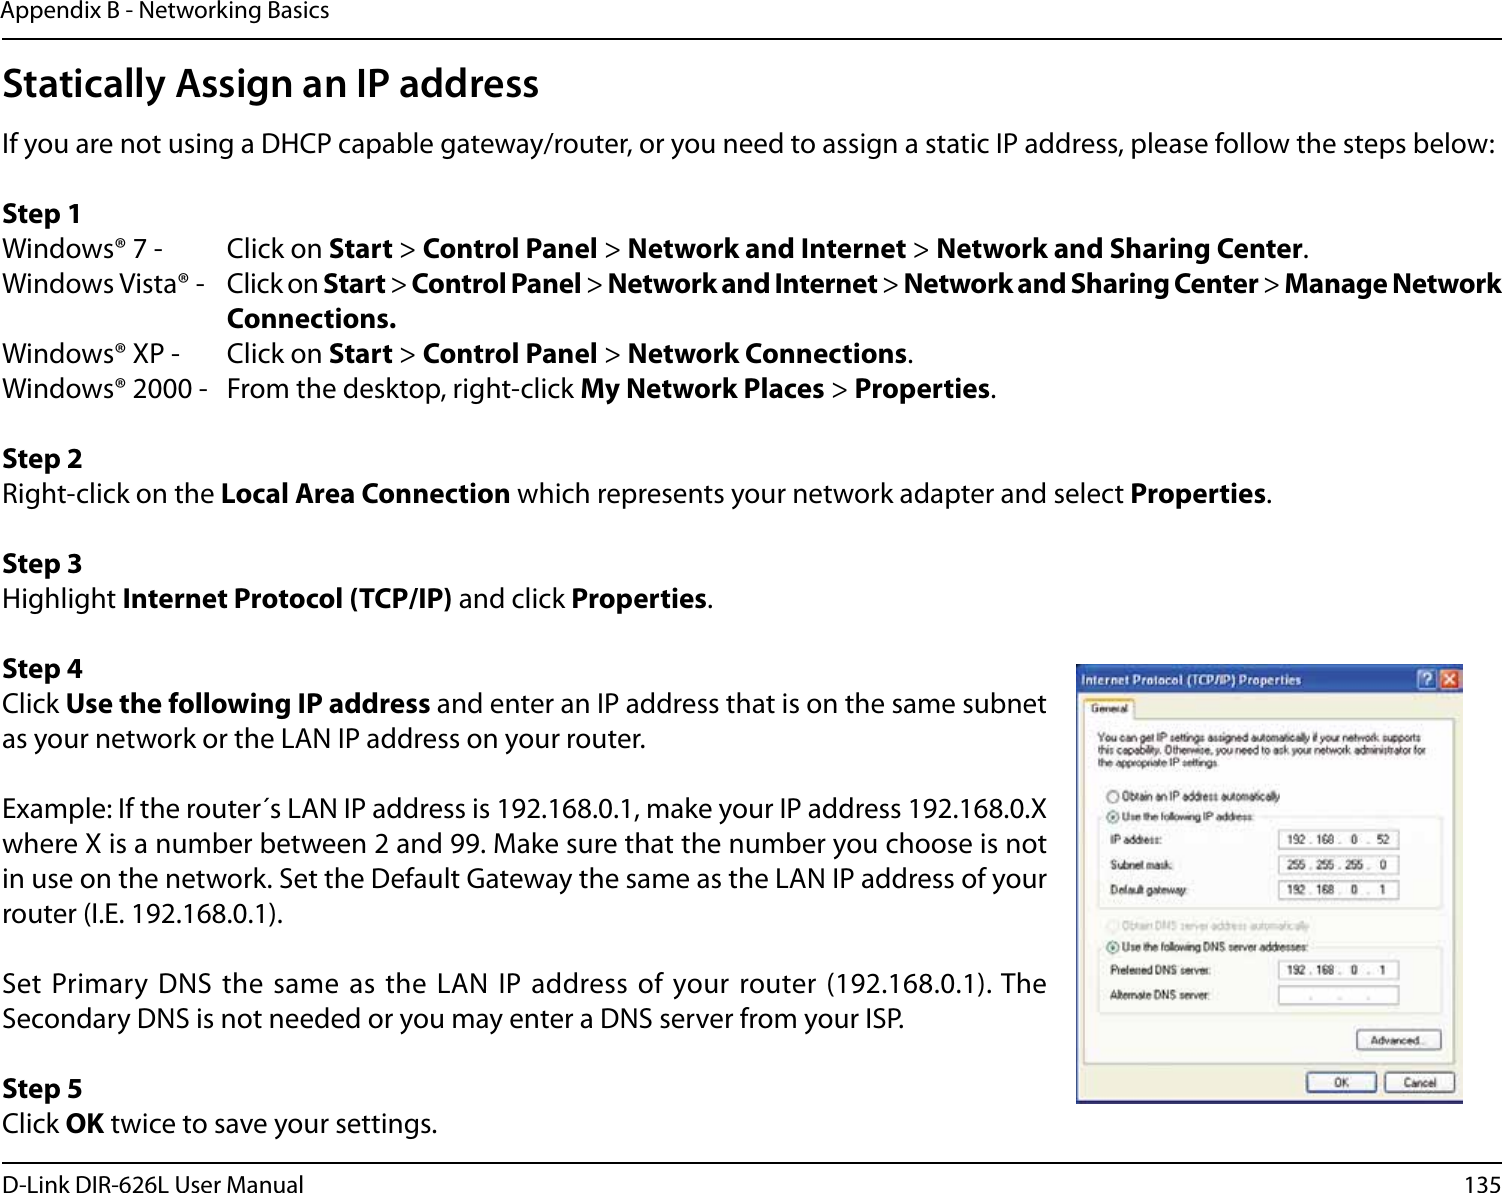 135D-Link DIR-626L User ManualAppendix B - Networking BasicsStatically Assign an IP addressIf you are not using a DHCP capable gateway/router, or you need to assign a static IP address, please follow the steps below:Step 1Windows® 7 -  Click on Start &gt; Control Panel &gt; Network and Internet &gt; Network and Sharing Center.Windows Vista® -  Click on Start &gt; Control Panel &gt; Network and Internet &gt; Network and Sharing Center &gt; Manage Network      Connections.Windows® XP -  Click on Start &gt; Control Panel &gt; Network Connections.Windows® 2000 -  From the desktop, right-click My Network Places &gt; Properties.Step 2Right-click on the Local Area Connection which represents your network adapter and select Properties.Step 3Highlight Internet Protocol (TCP/IP) and click Properties.Step 4Click Use the following IP address and enter an IP address that is on the same subnet as your network or the LAN IP address on your router. Example: If the router´s LAN IP address is 192.168.0.1, make your IP address 192.168.0.X where X is a number between 2 and 99. Make sure that the number you choose is not in use on the network. Set the Default Gateway the same as the LAN IP address of your router (I.E. 192.168.0.1). Set Primary  DNS the same as the  LAN IP address of  your router (192.168.0.1). The Secondary DNS is not needed or you may enter a DNS server from your ISP.Step 5Click OK twice to save your settings.